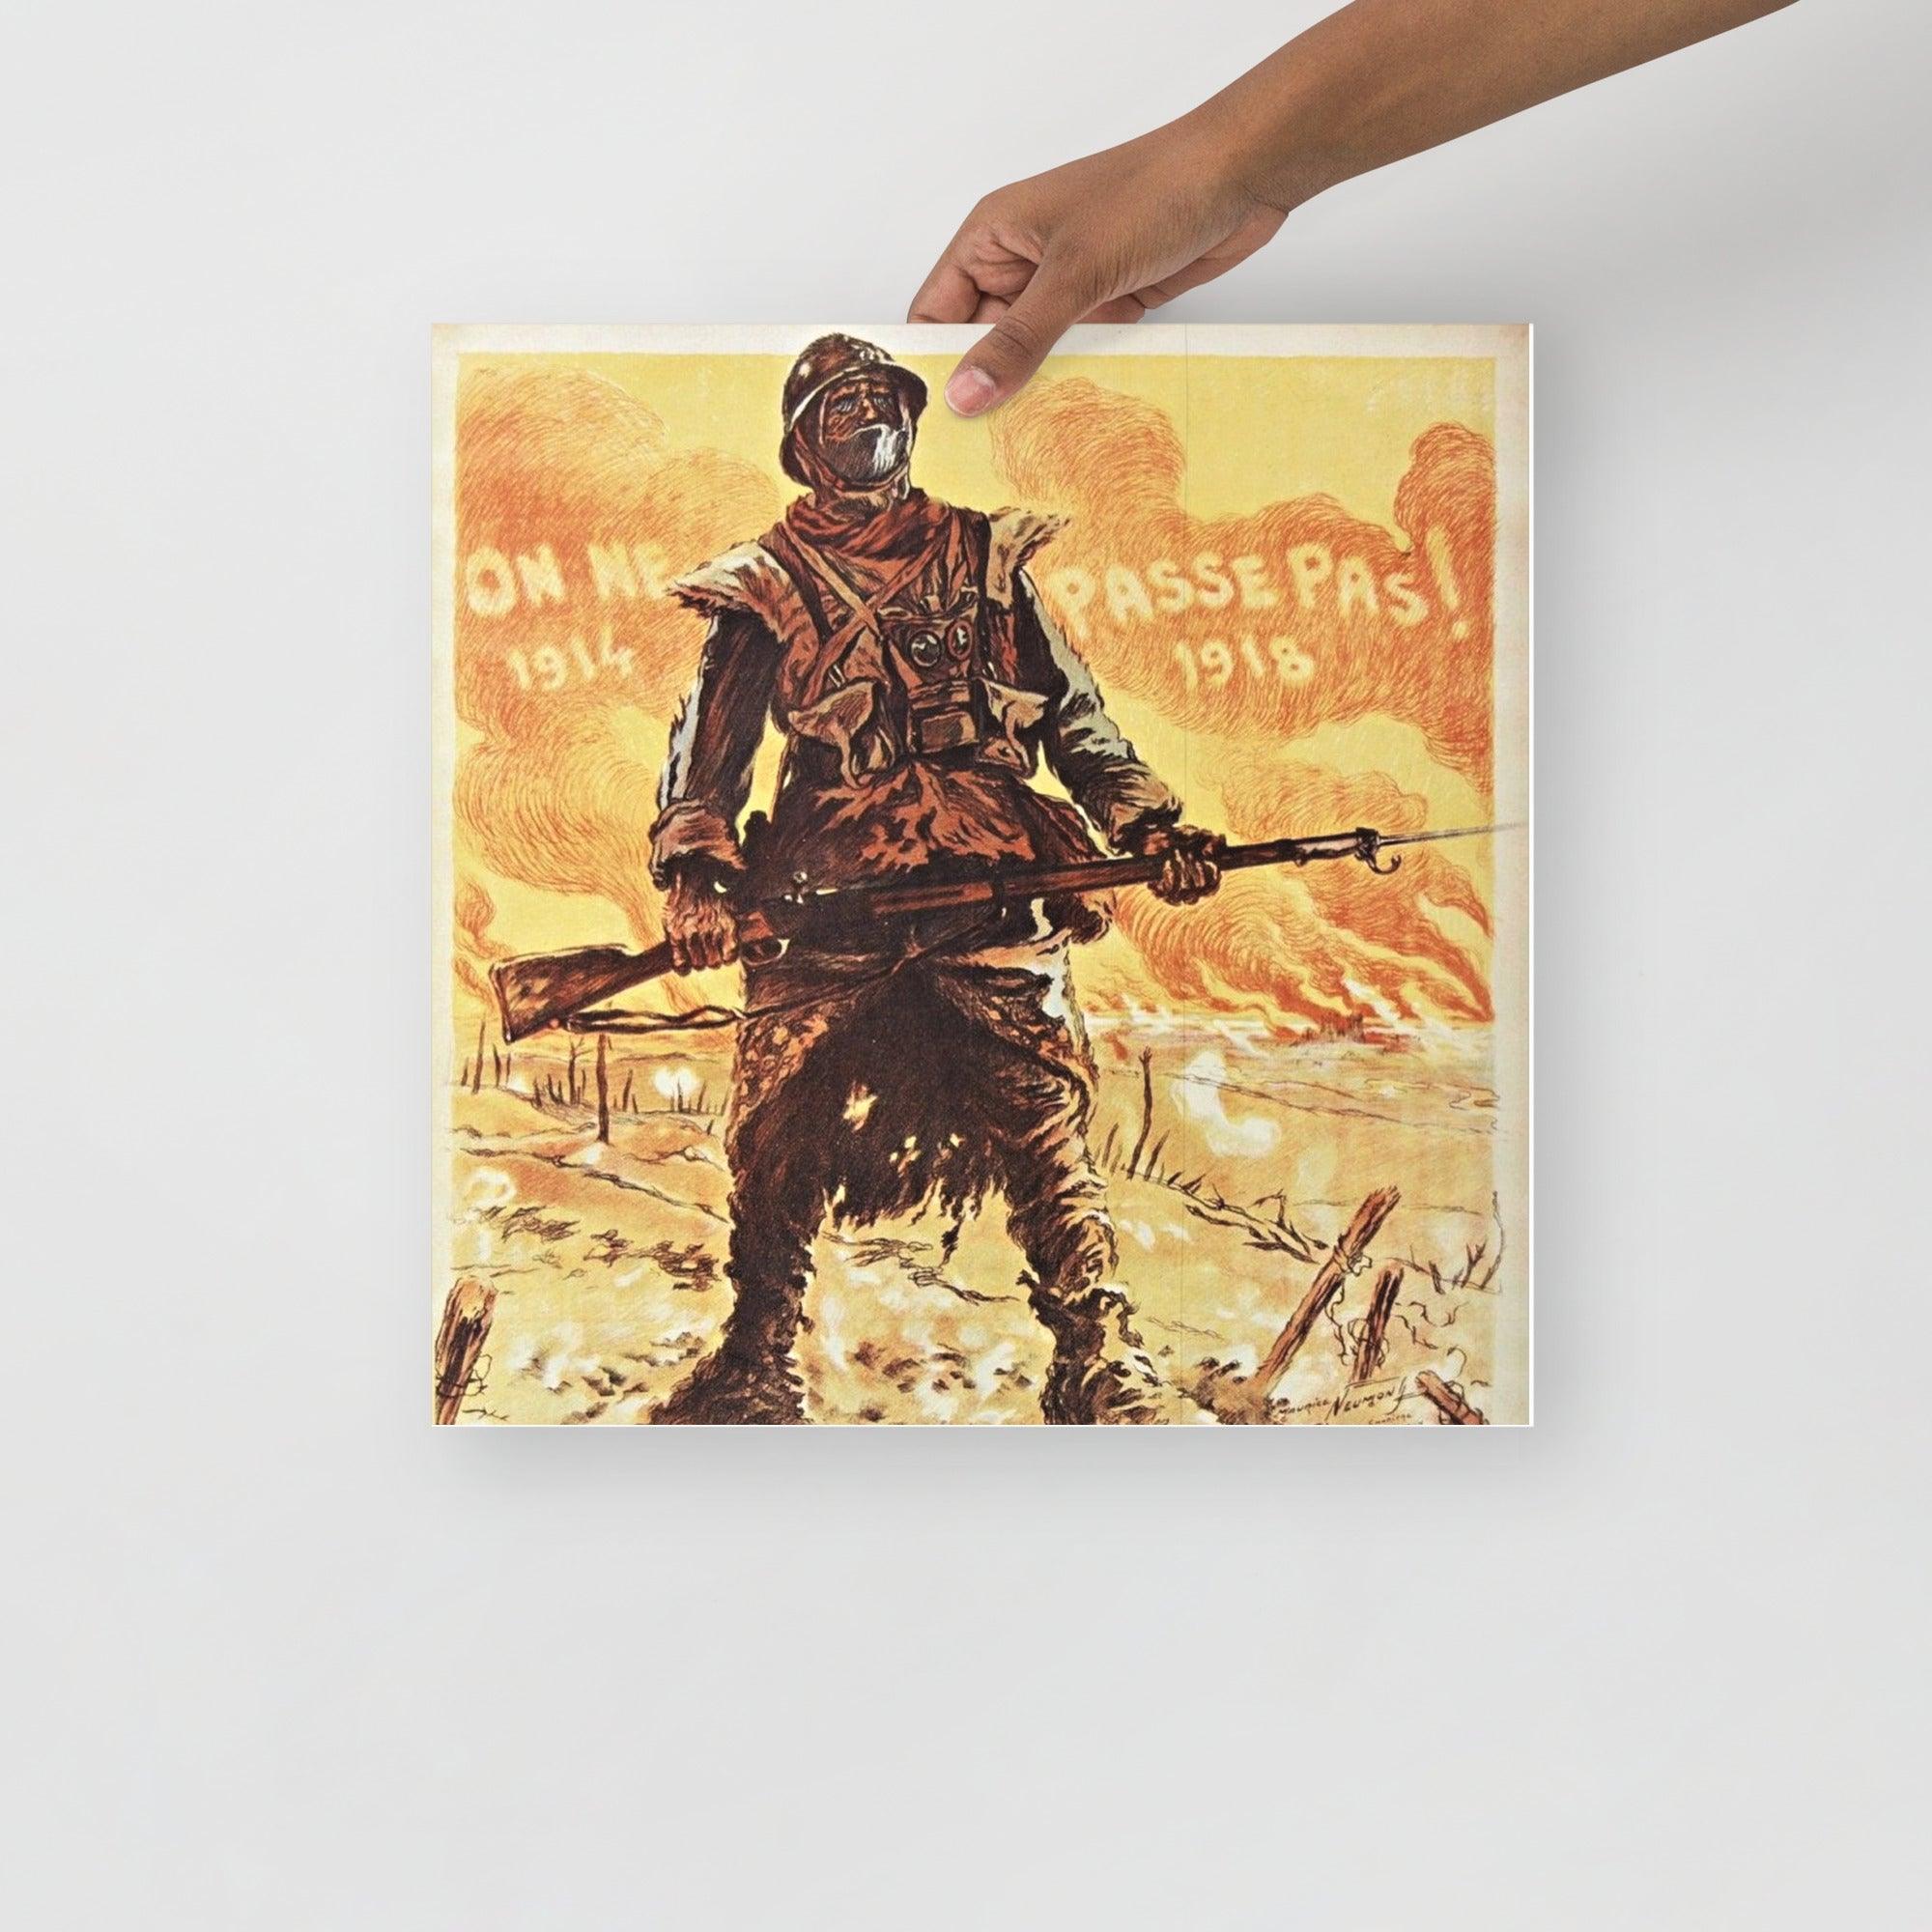 A They Shall Not Pass (On Ne Passe Pas) By Maurice Neumont poster on a plain backdrop in size 16x16”.